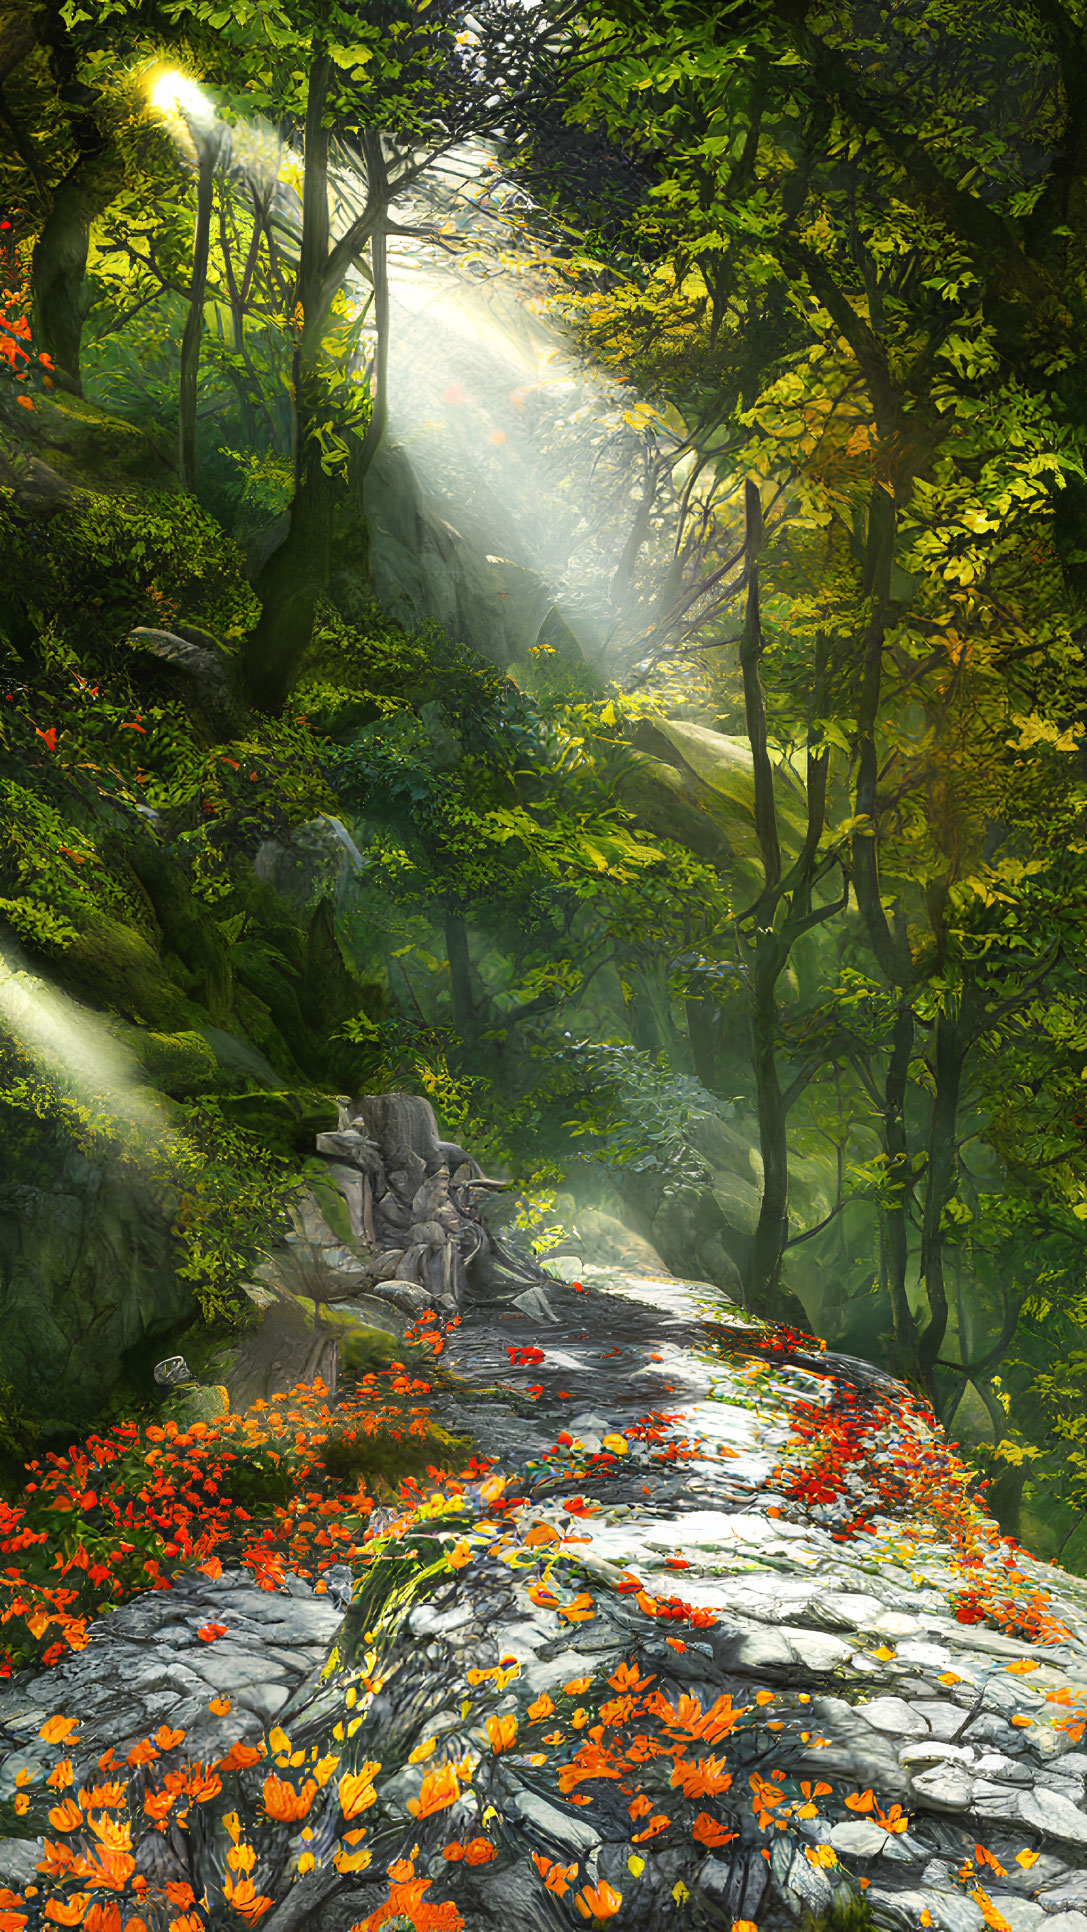 Forest canopy sunlight on stone path with orange and red flowers